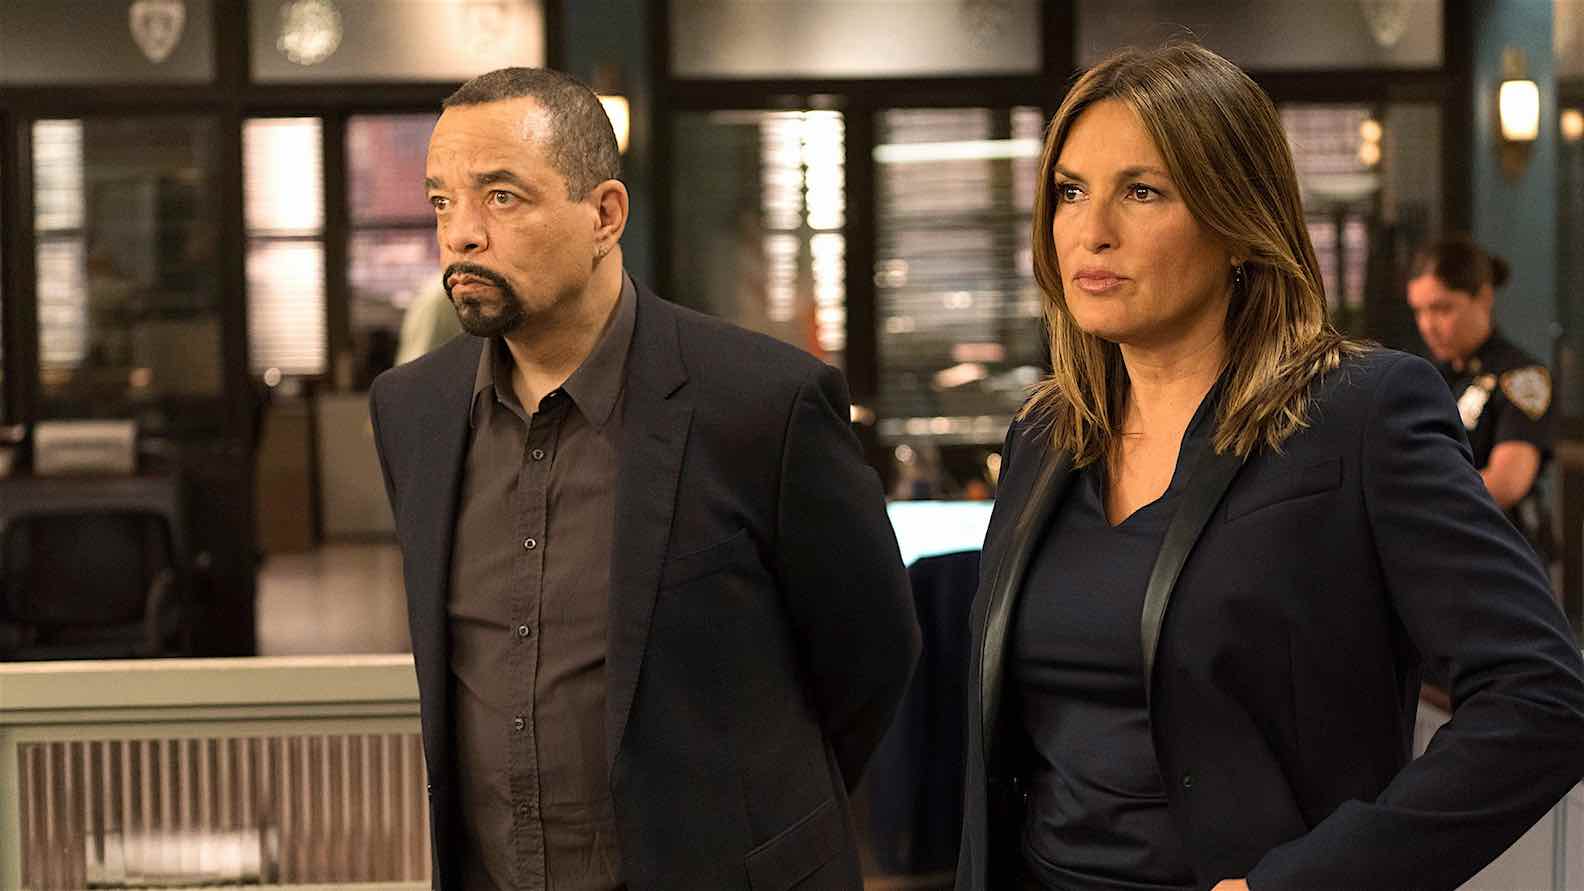 The original cast of 'Law and Order SVU' is returning Everything to